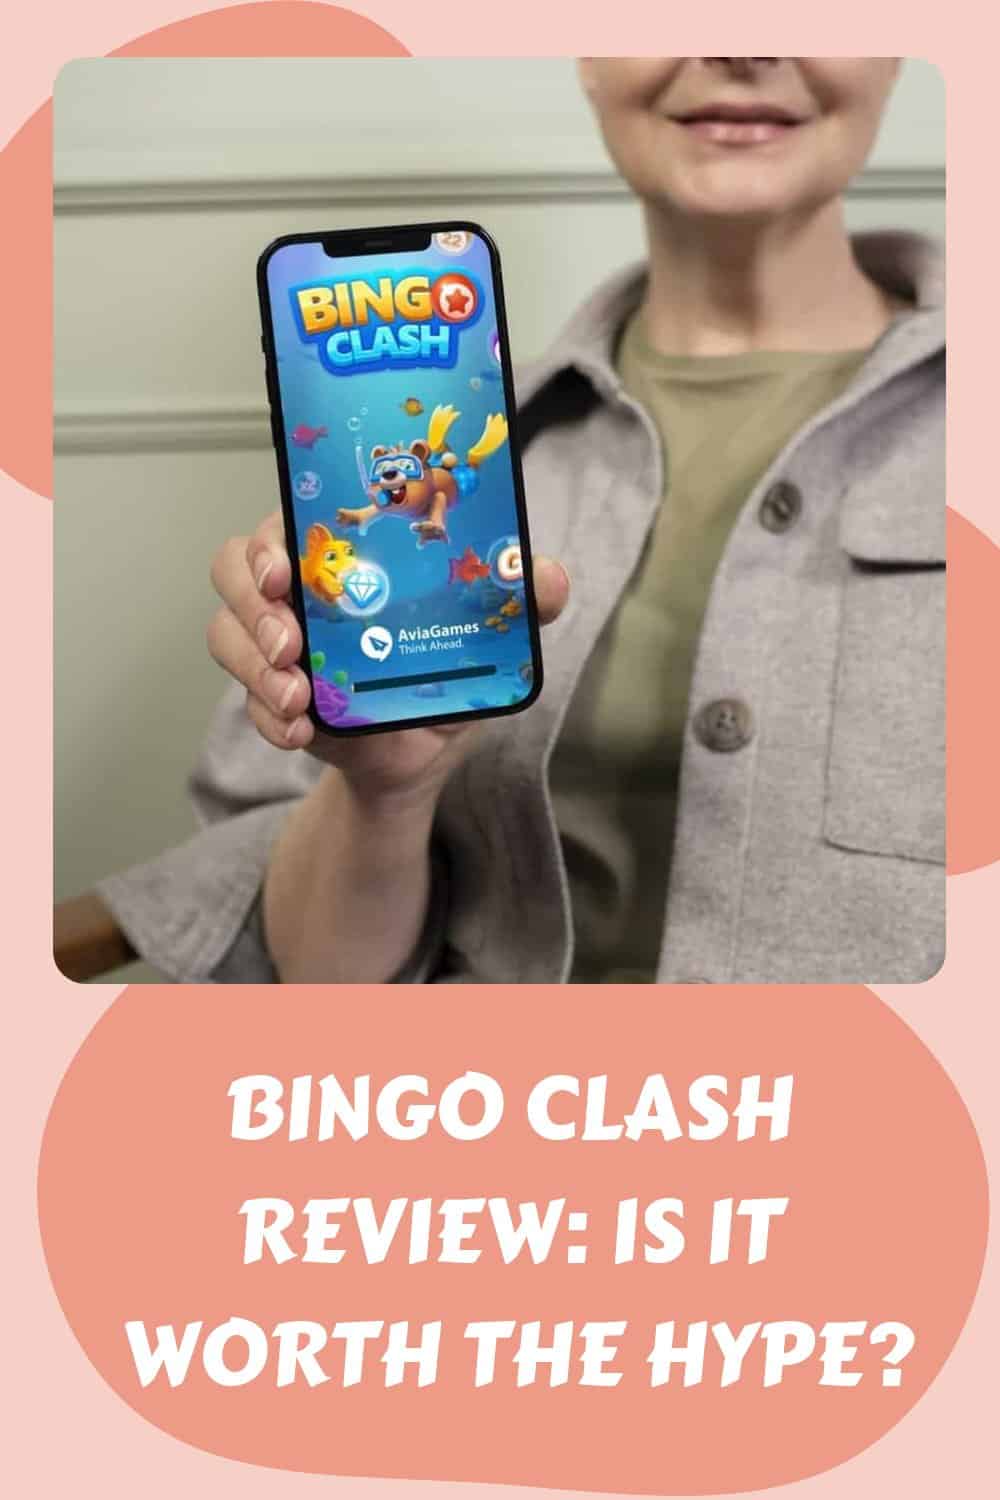 bingo-clash-review-is-it-worth-the-hype